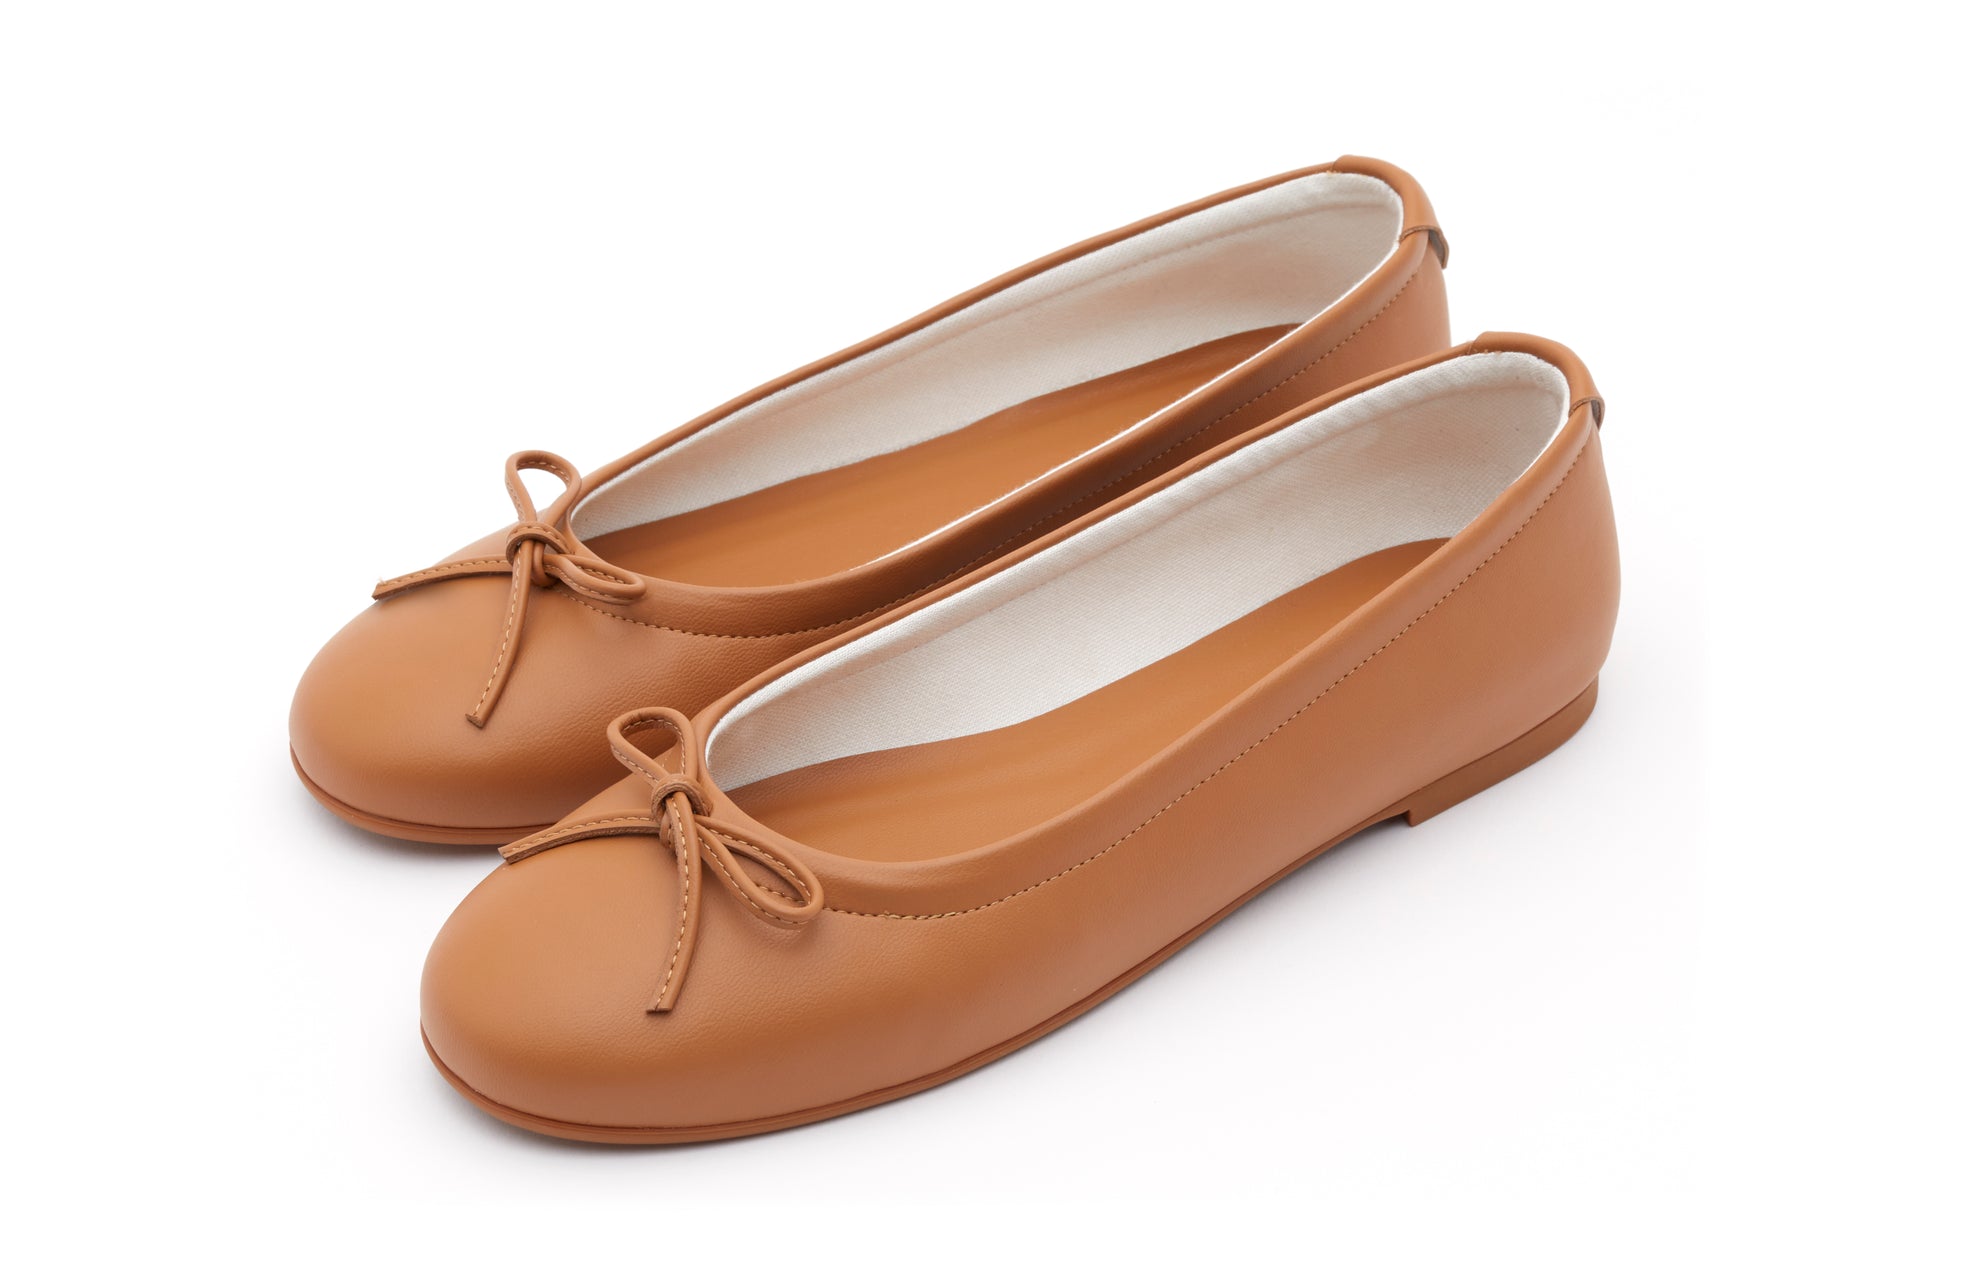 The Ballet Flat in Banbū Leather in Caramel image 1